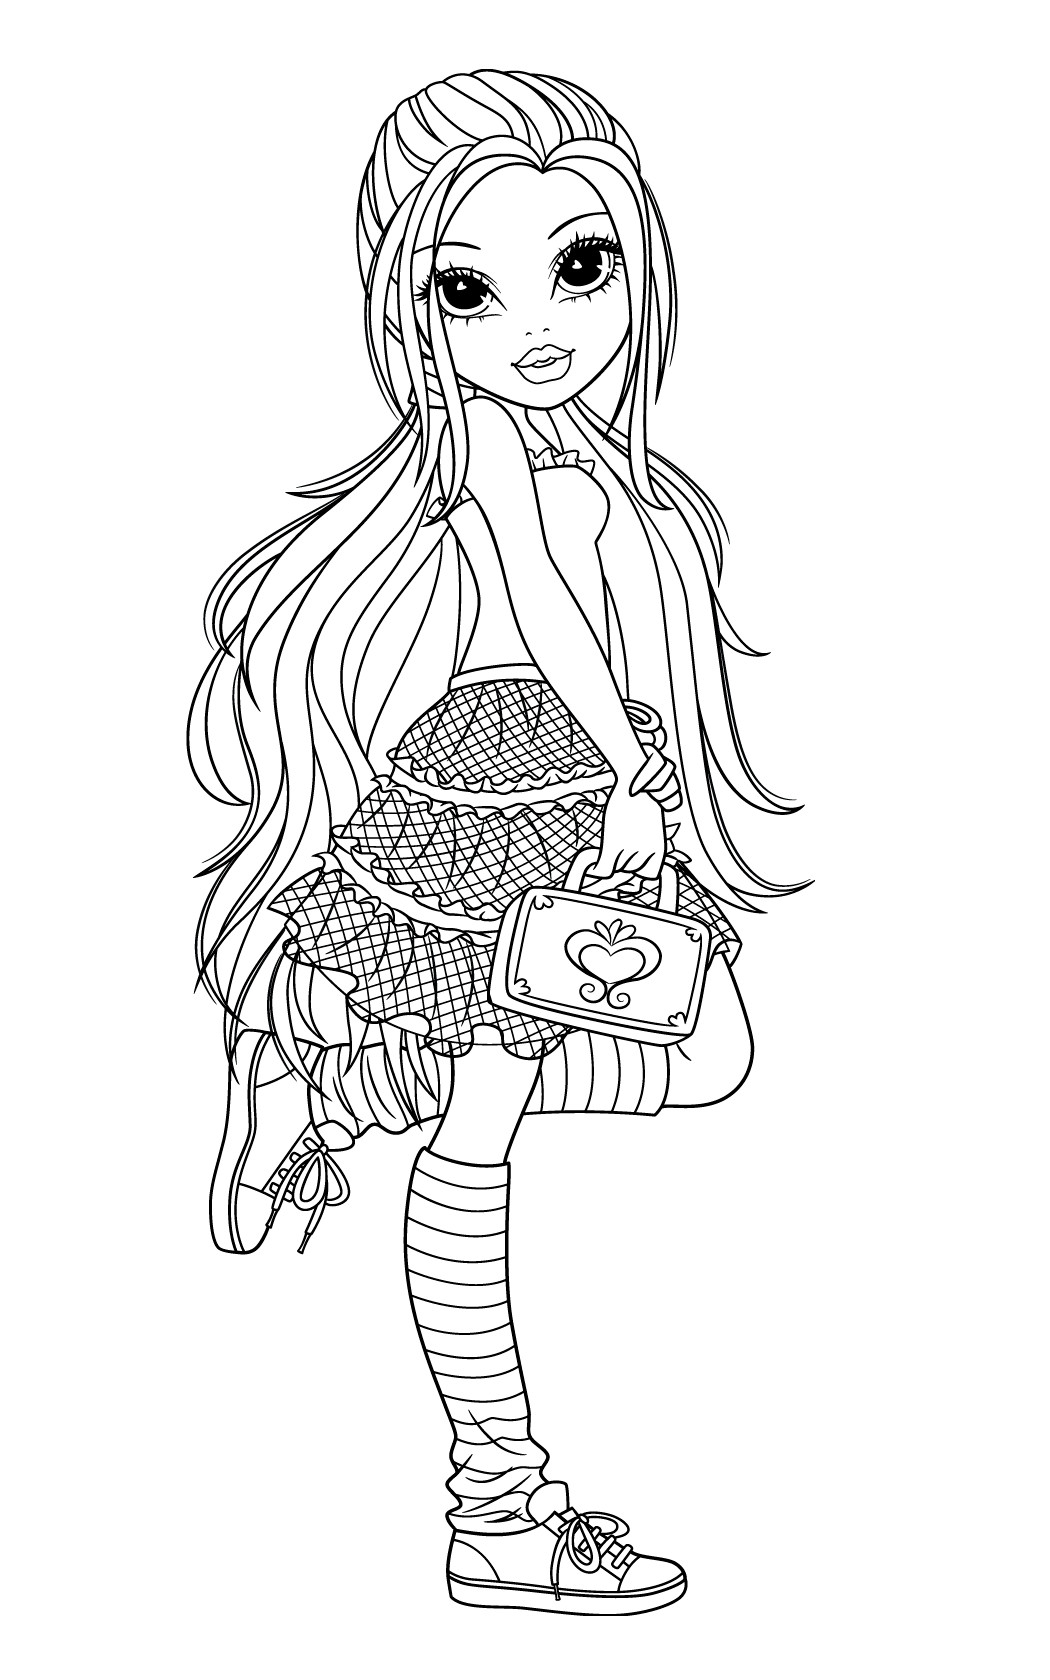 Coloring Sheets Of Girls
 New Moxie Girlz Coloring Pages will be added frequently so